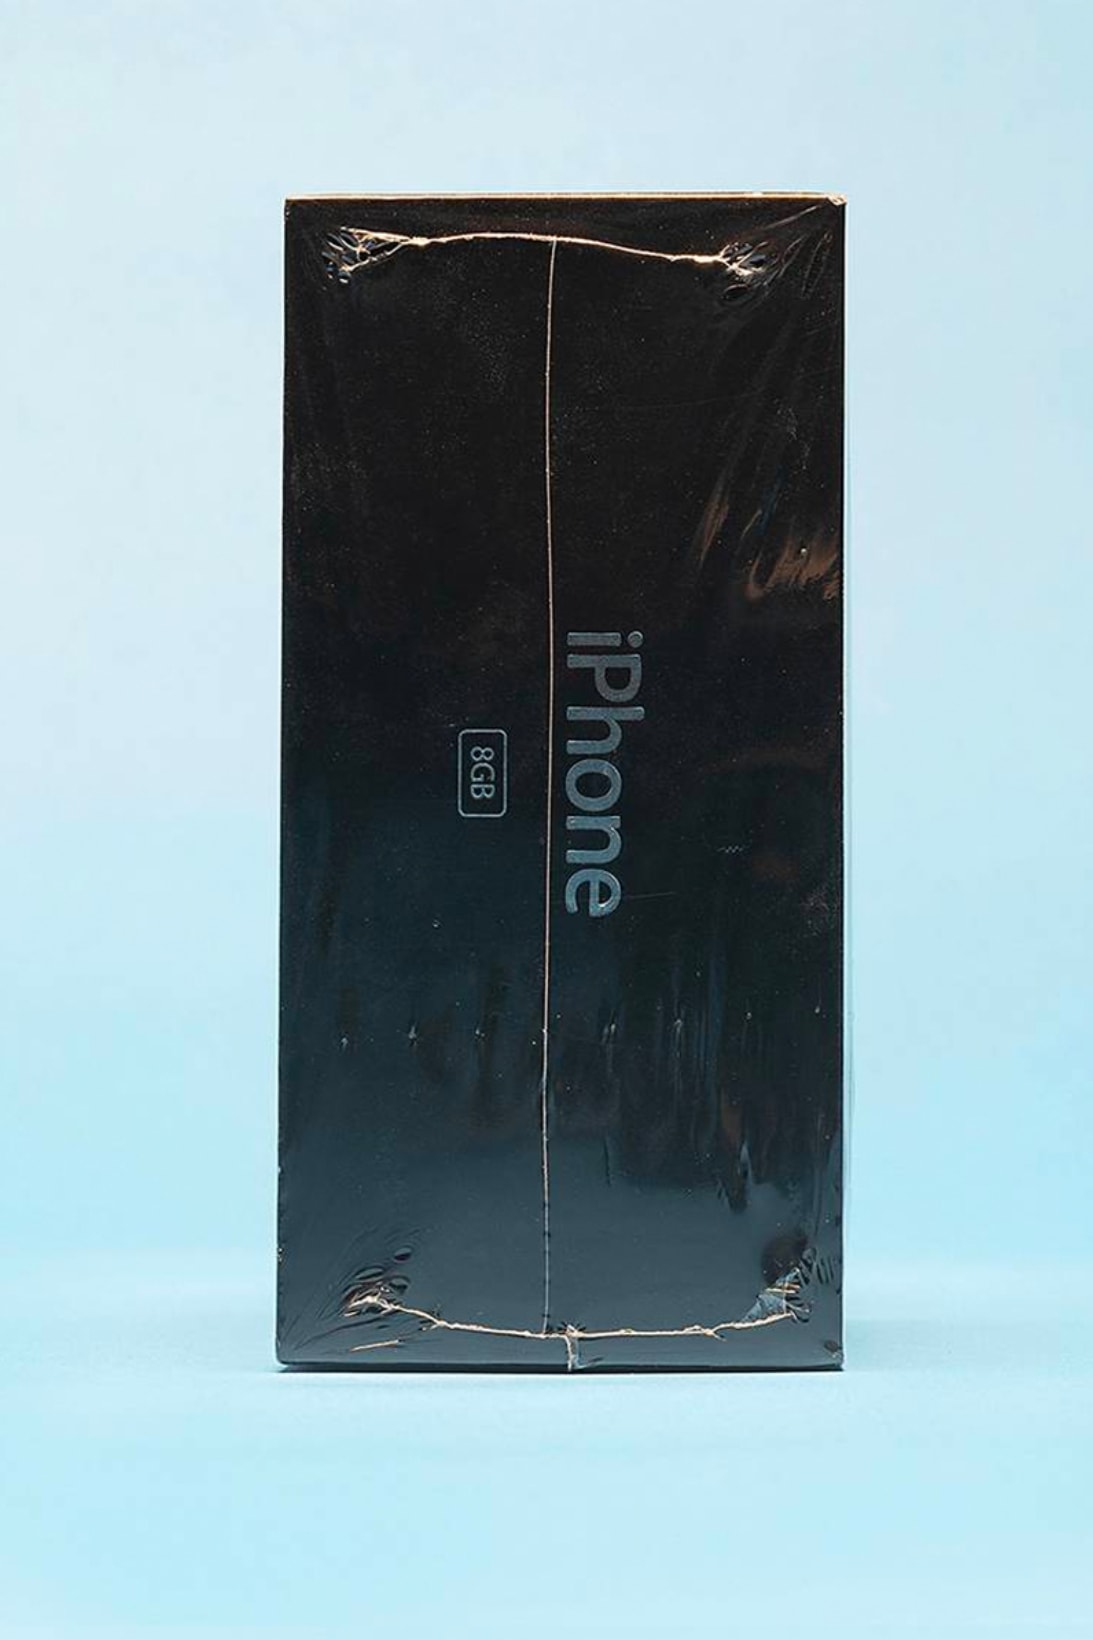 RR Auction Unopened First Generation Apple iPhone Auctions for $35K USD